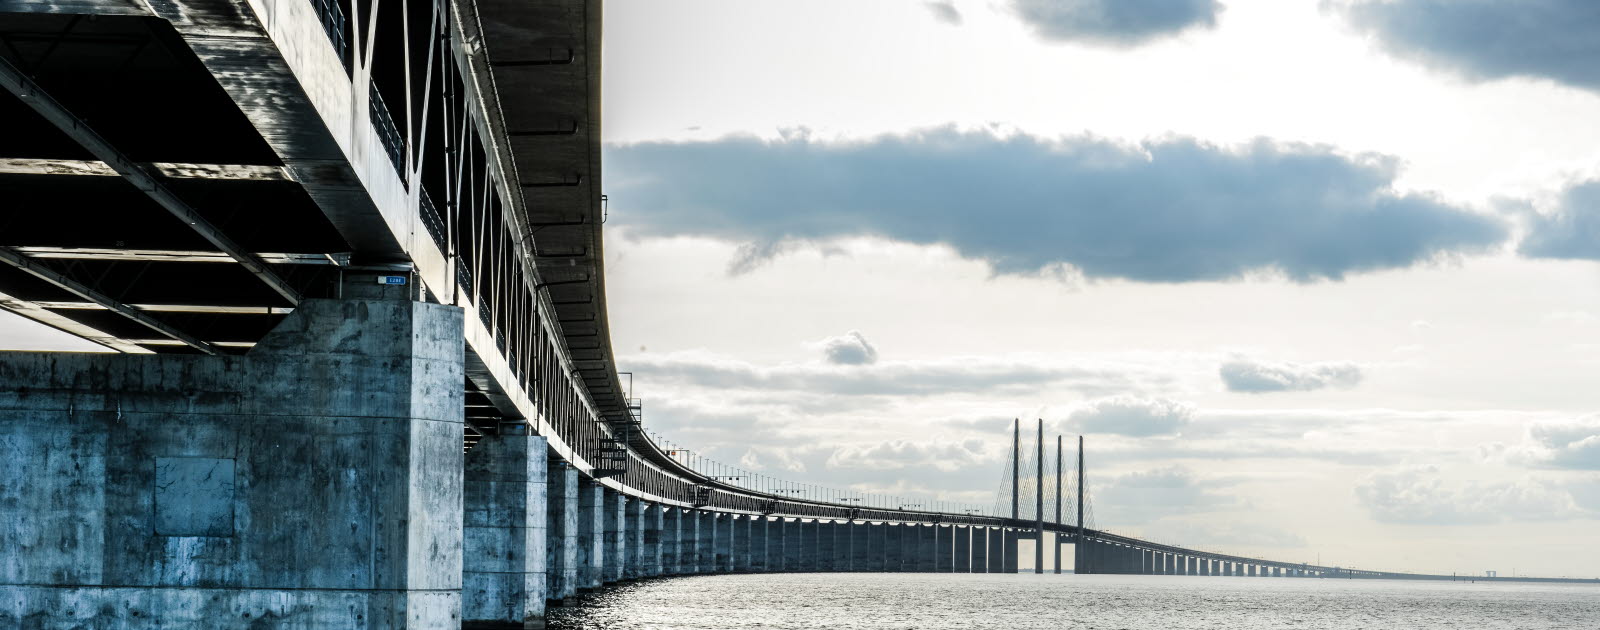 Öresundsbron connects Sweden to Denmark and the European continent. The bridge was finished in 2000 and is 15 km long. It is both a bridge and a tunnel and carries both motor and railway traffic.